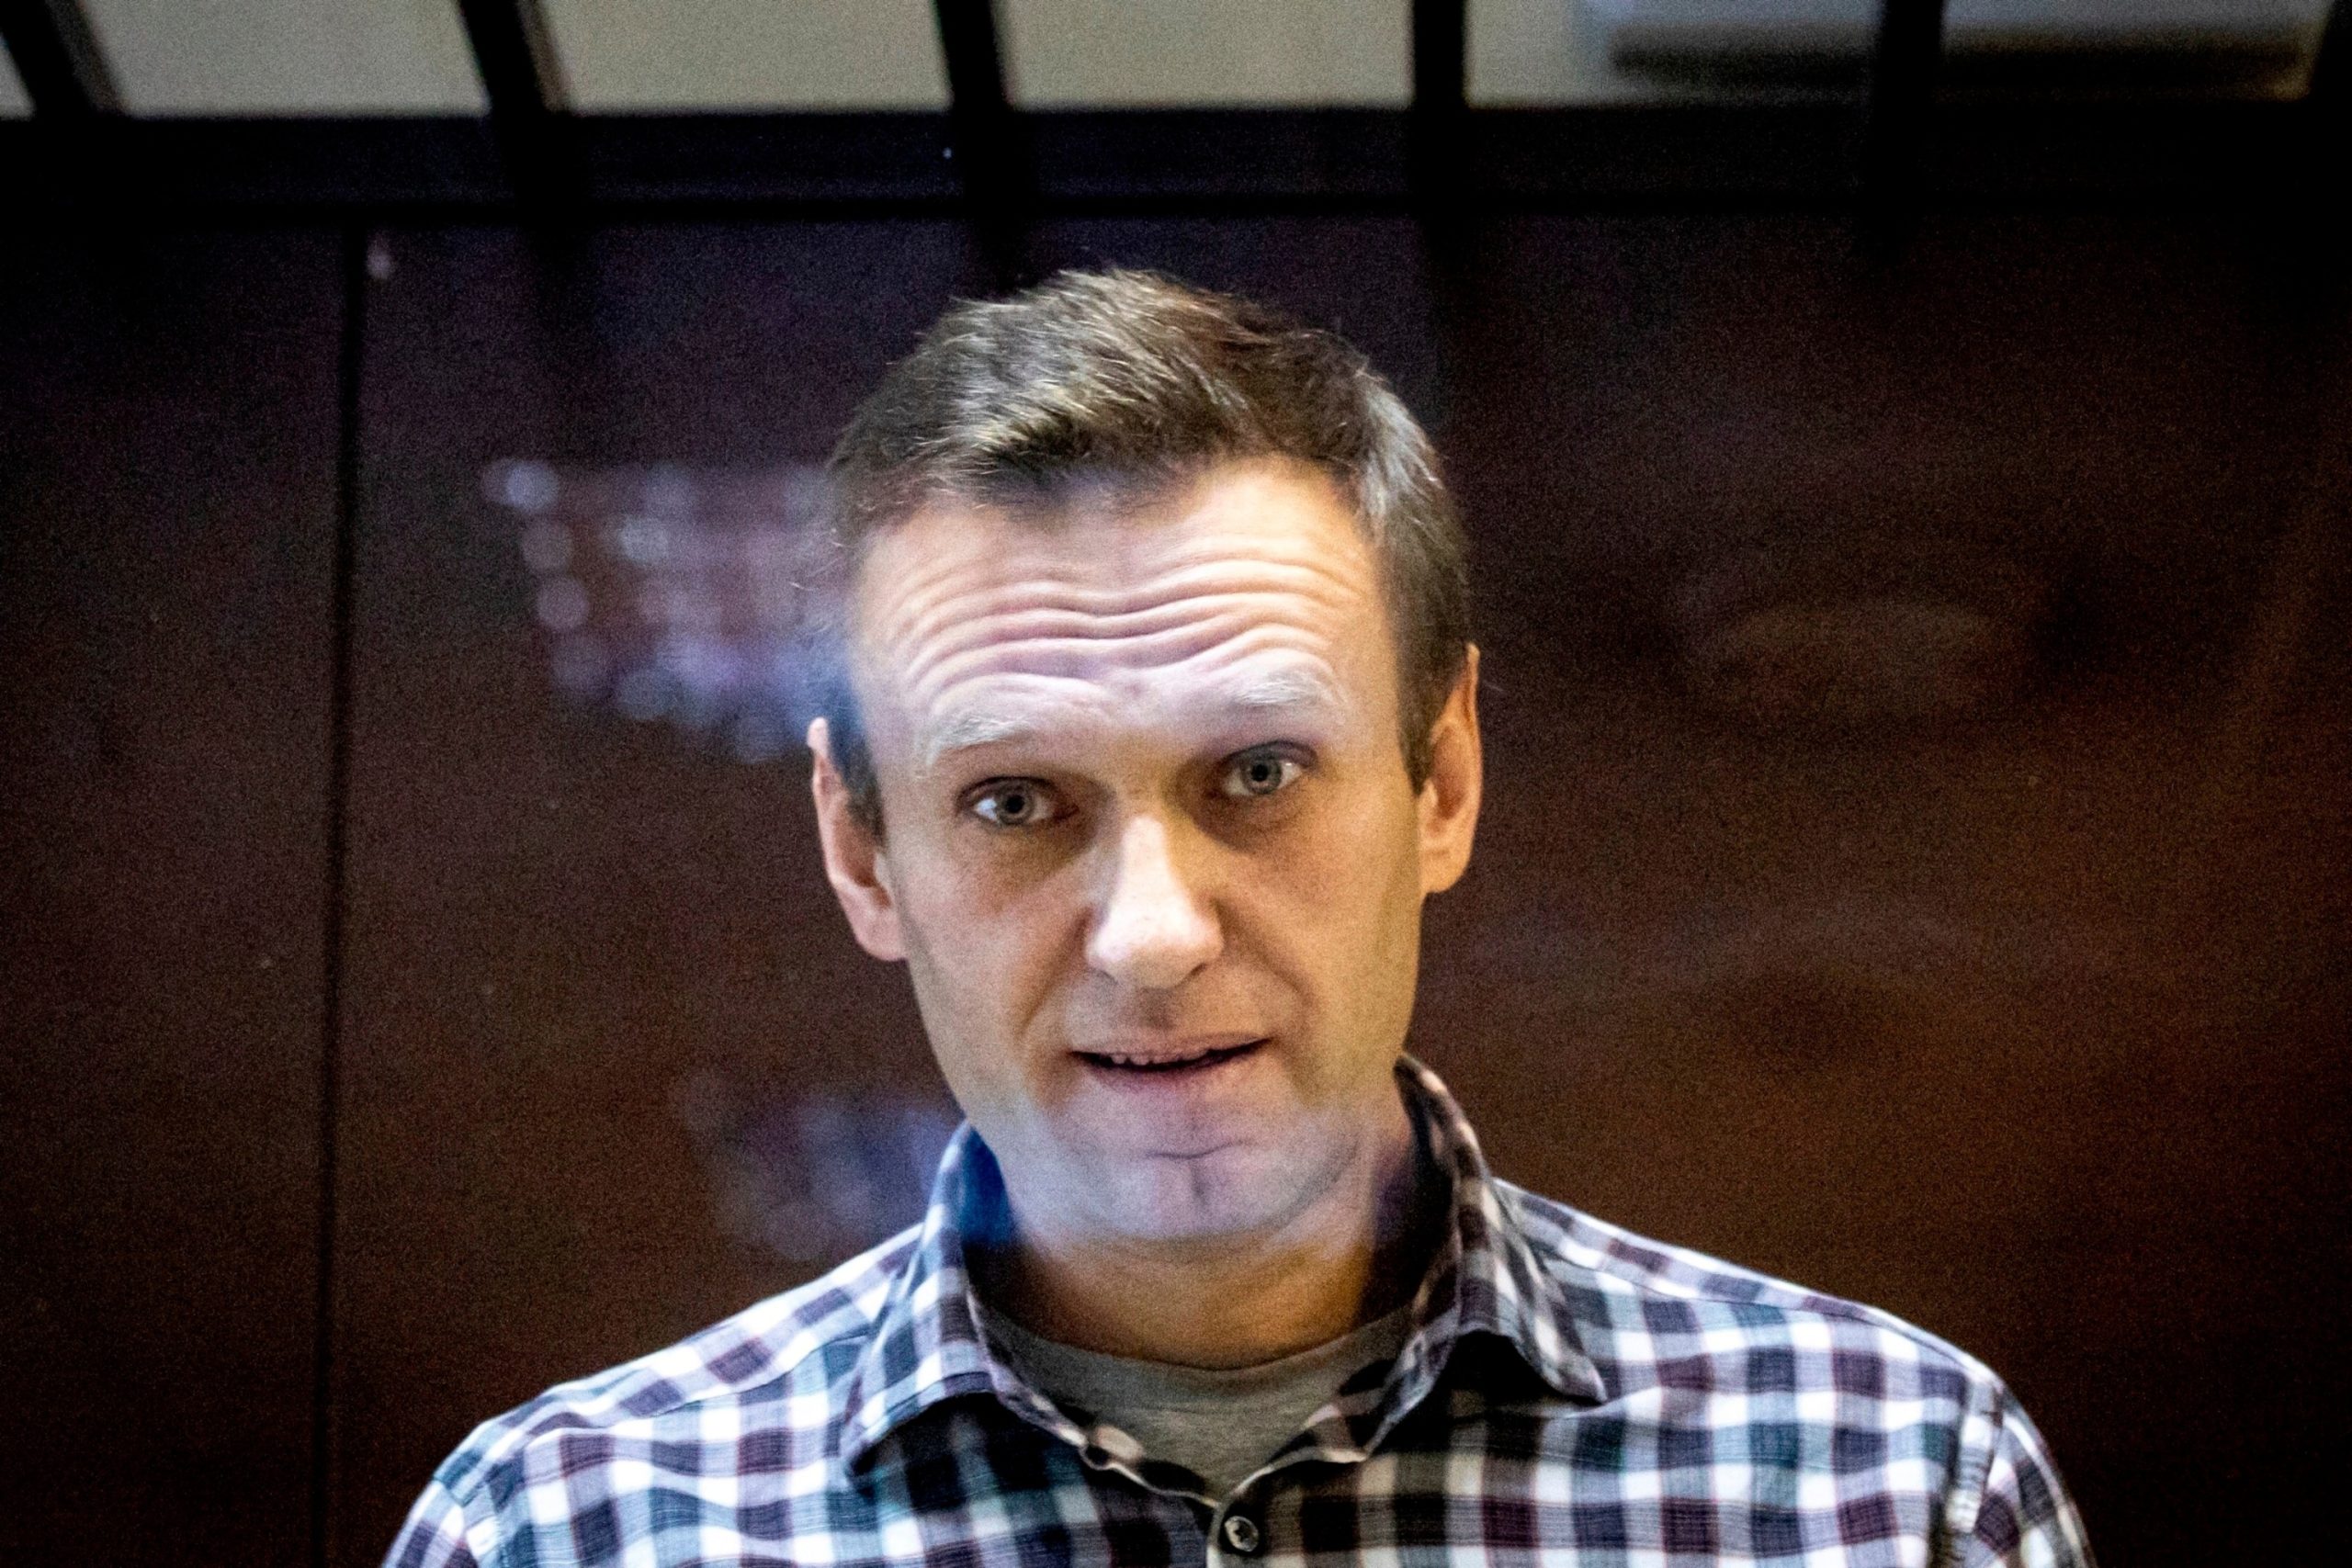 Alexey Navalny, Russian opposition leader, reported missing following his release from prison, according to spokeswoman